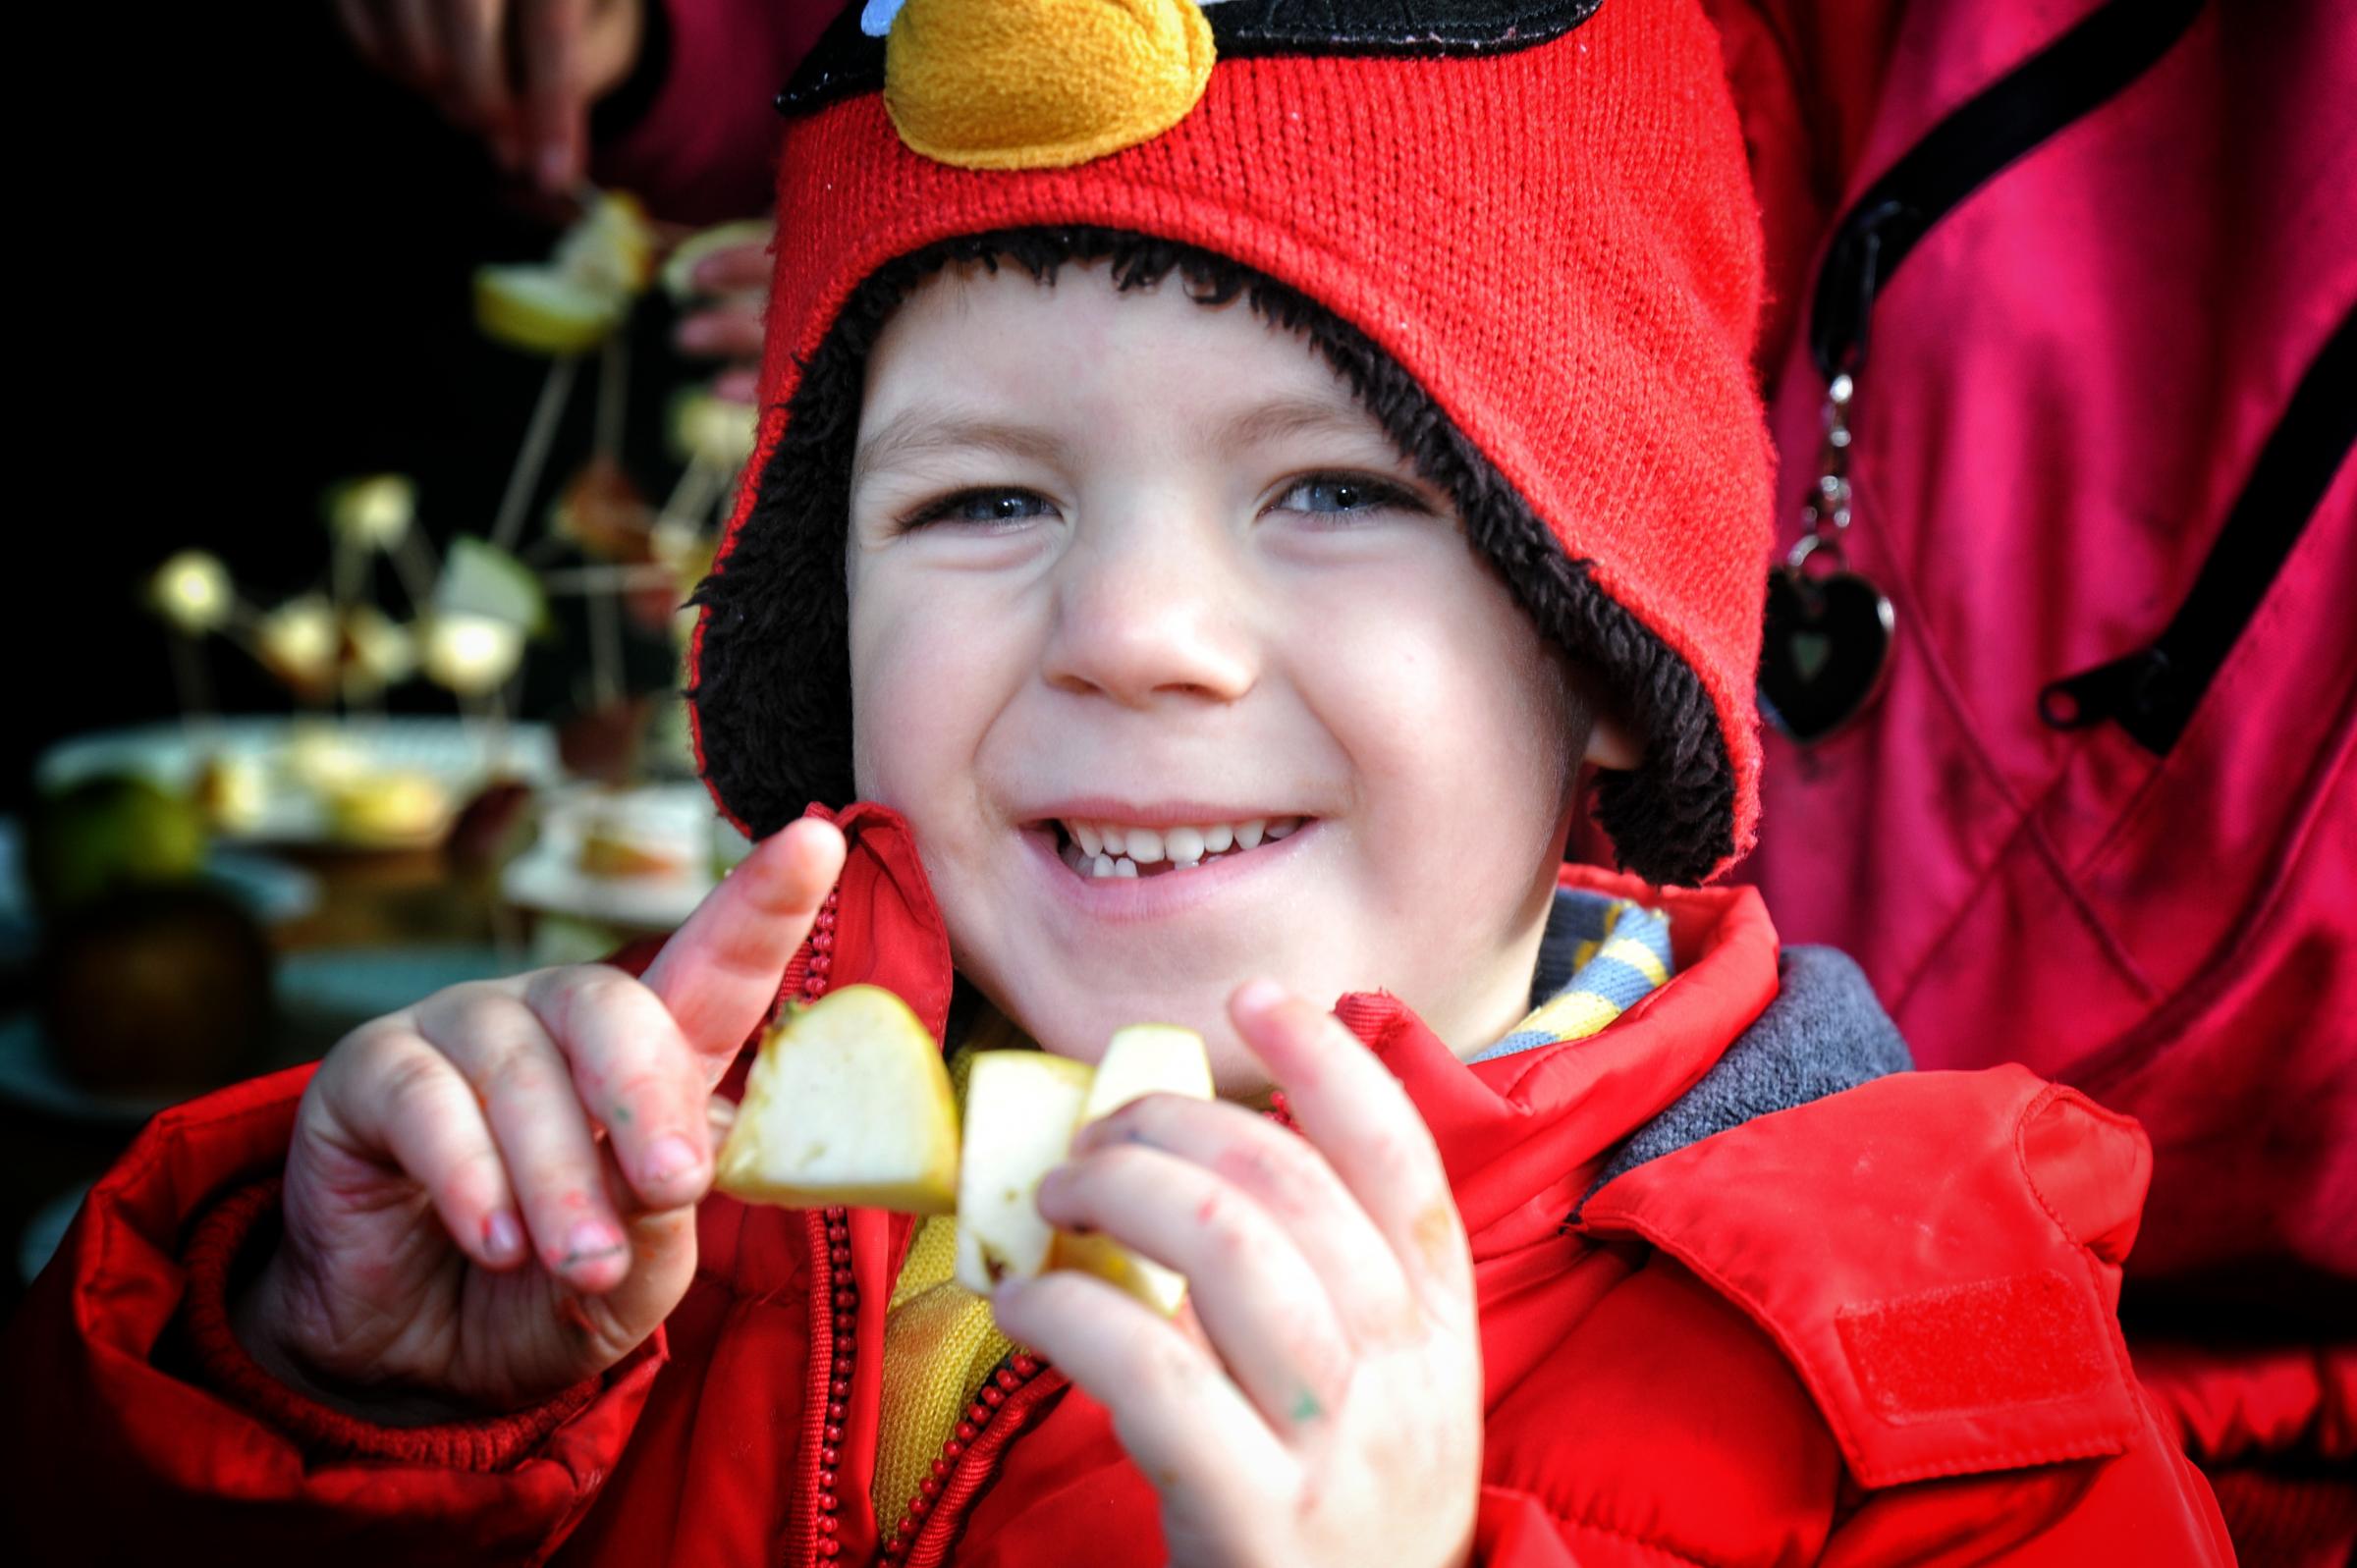 PICTURES: Crowds flock to popular apple festival